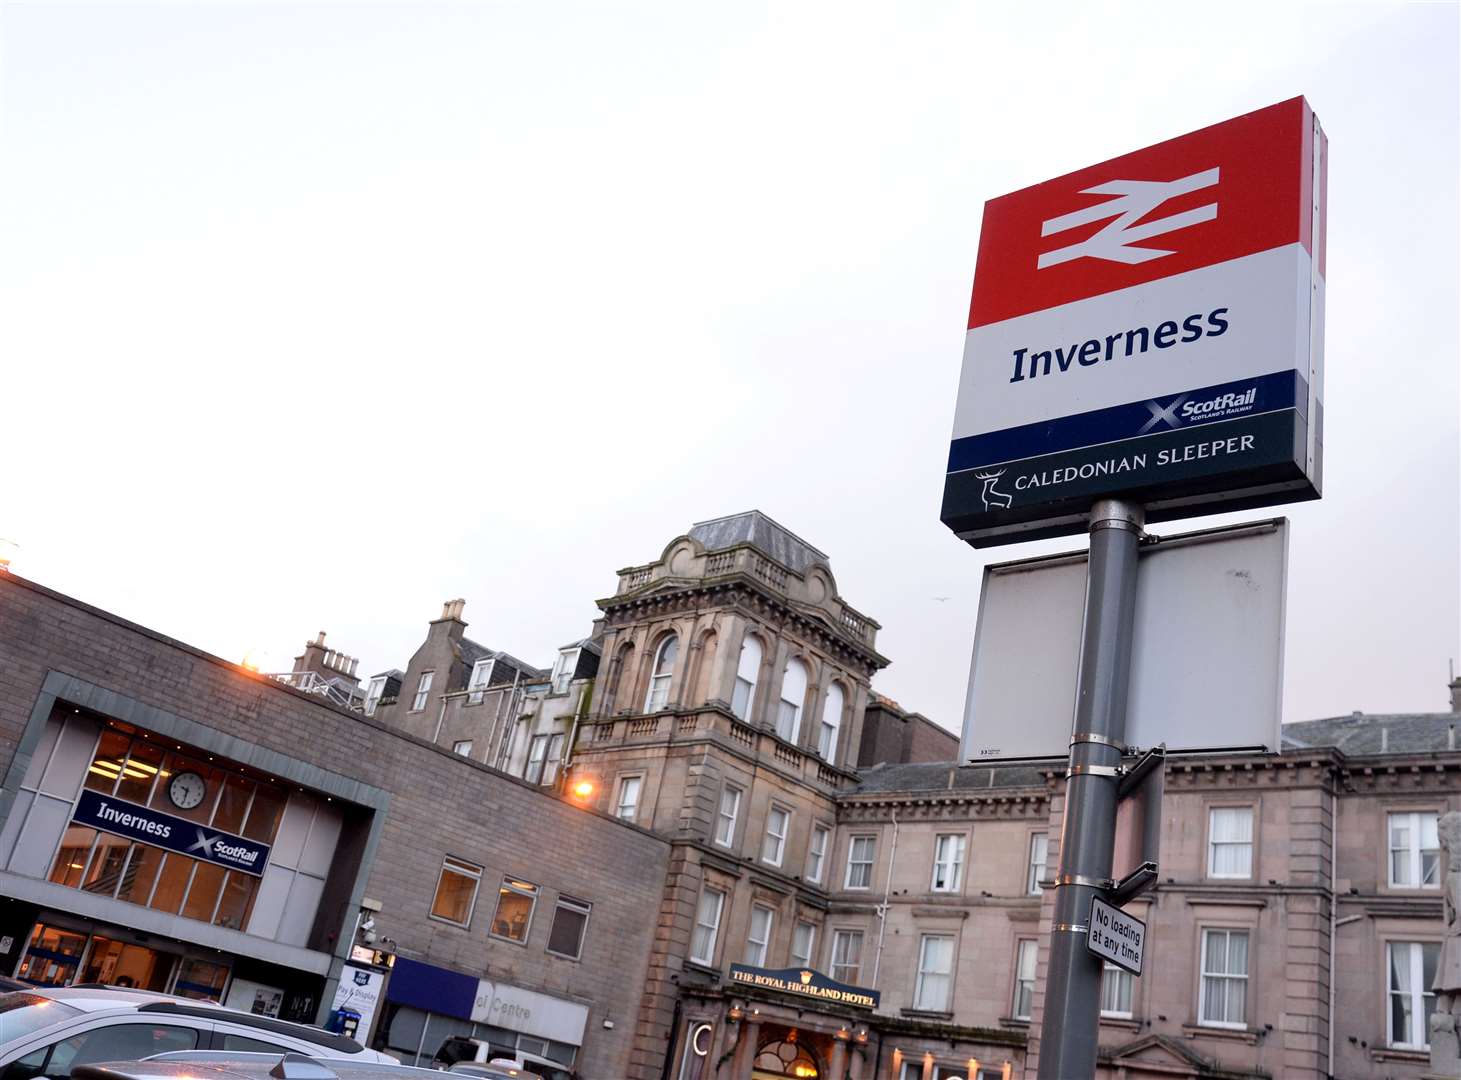 Toilet charges are to remain in place at Inverness railway station.